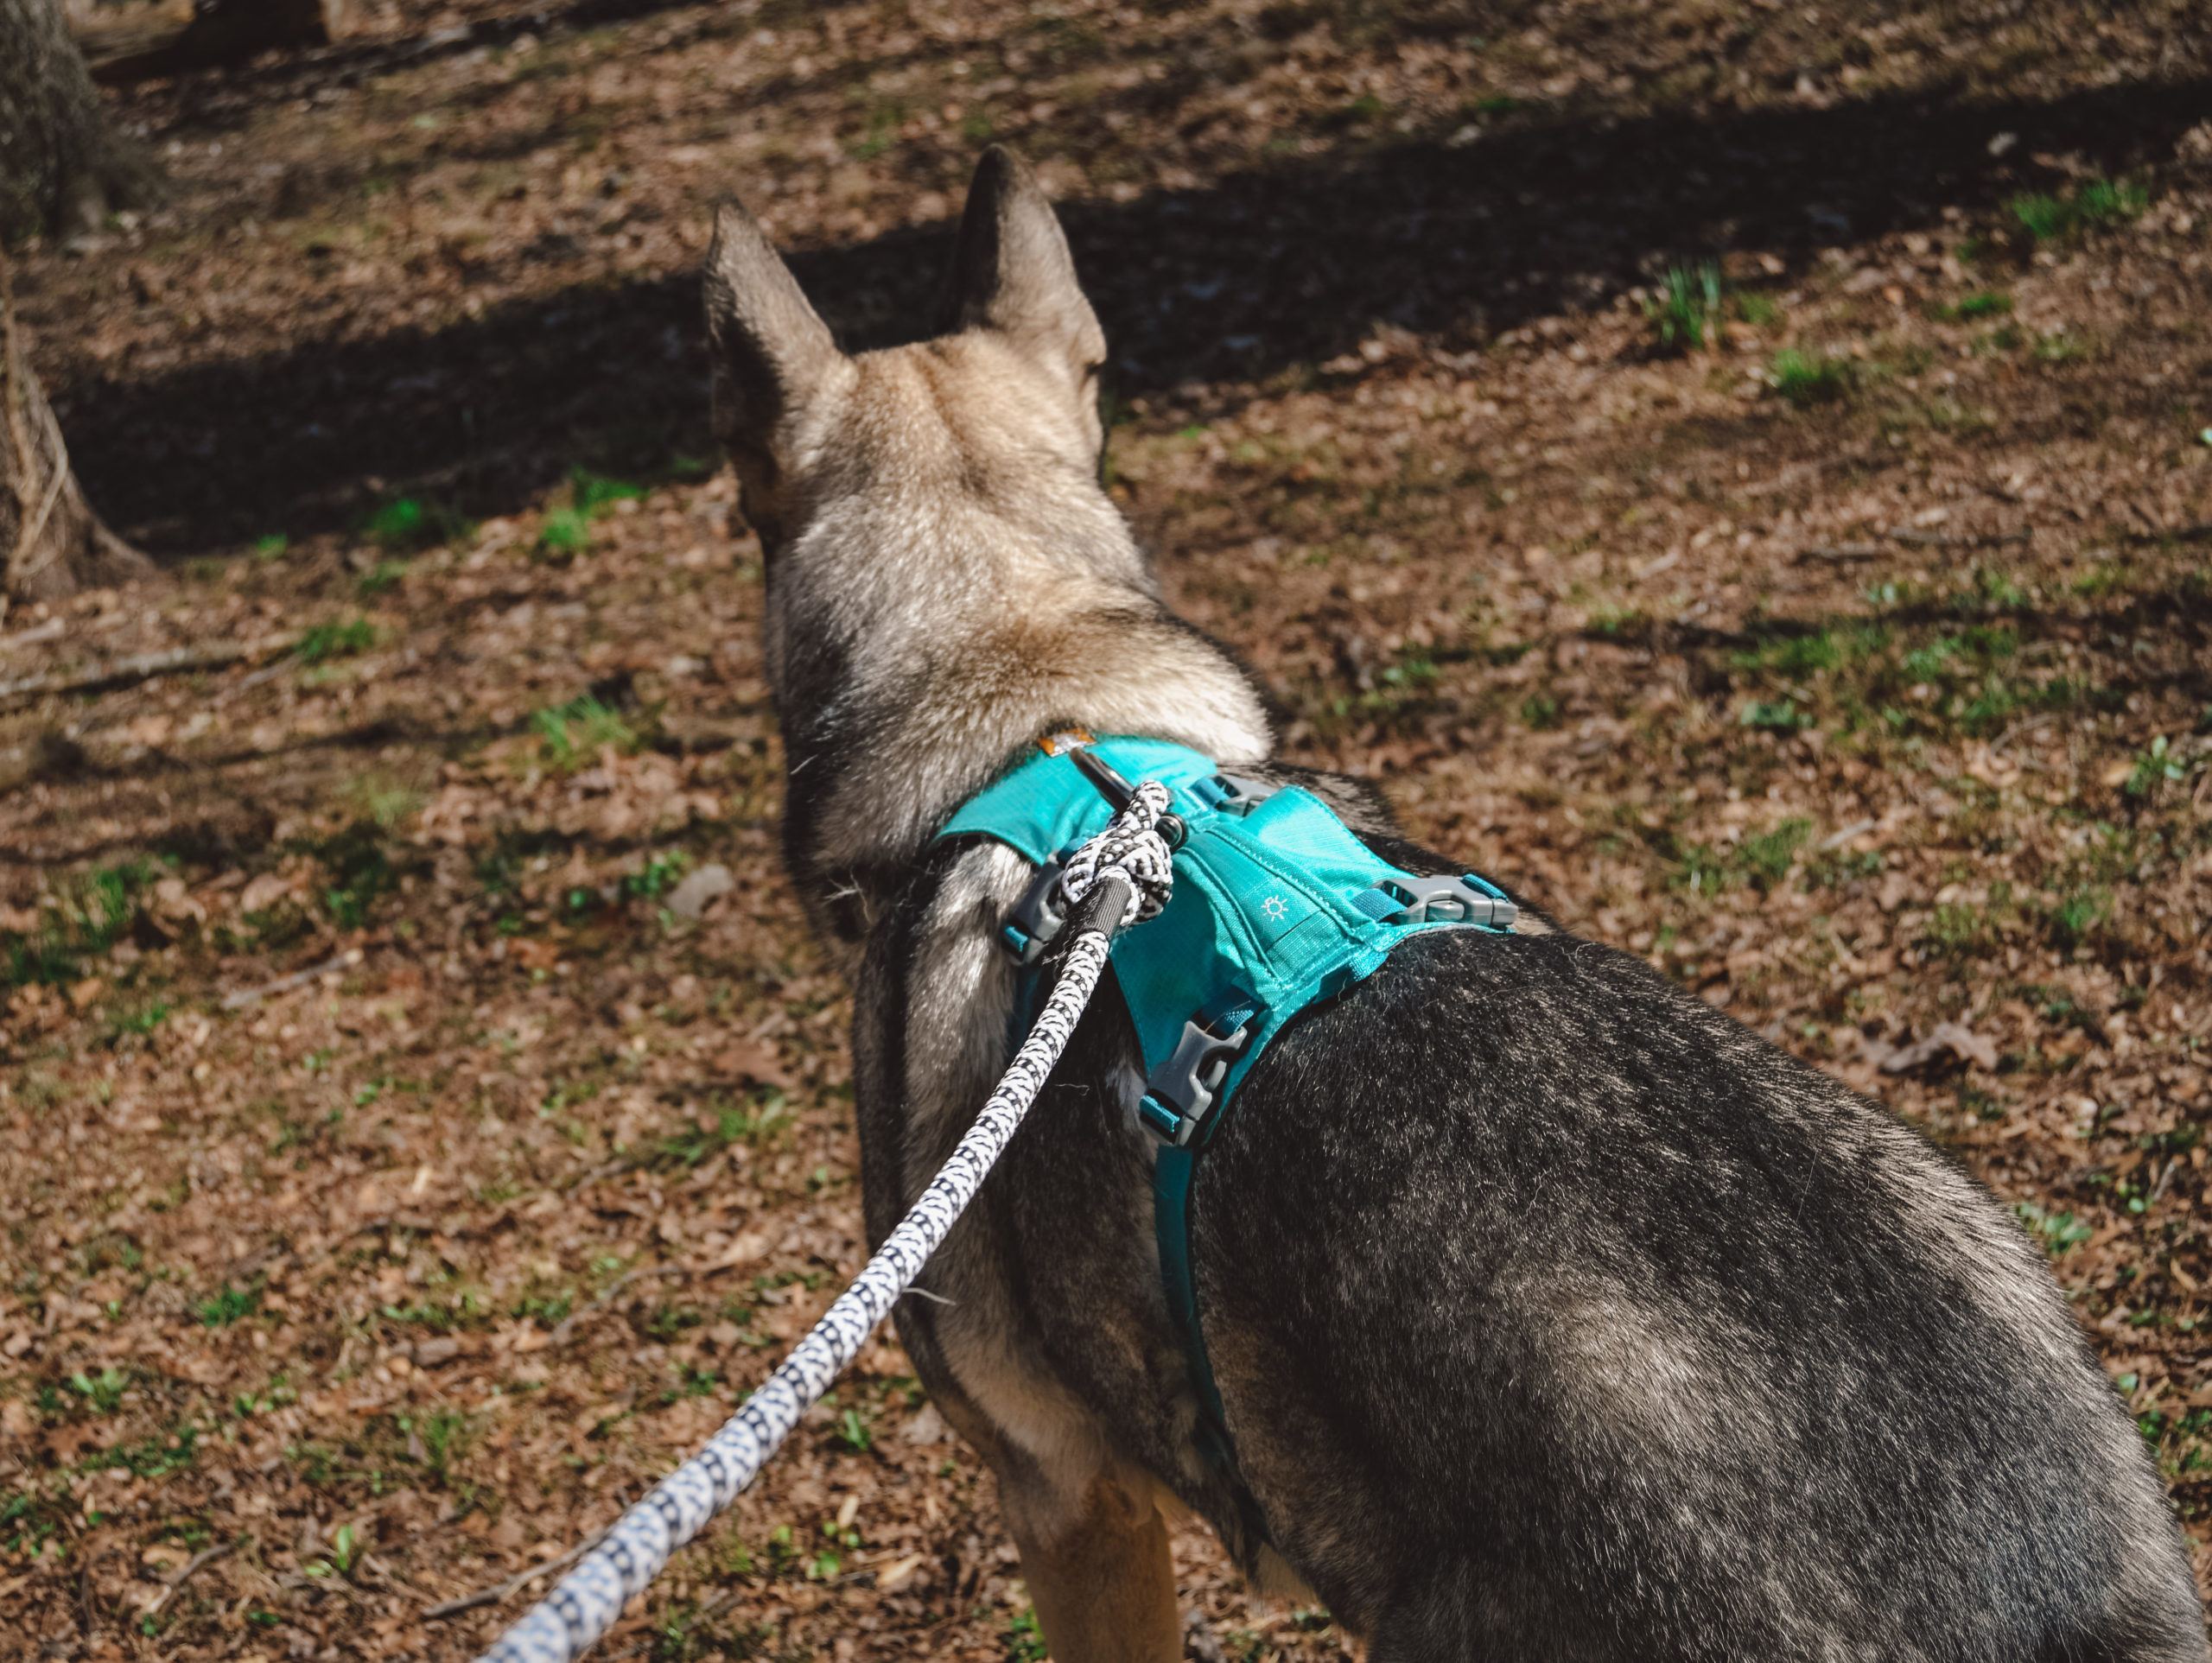 Wilderdog big carabiner leash is perfect for hiking with your dog